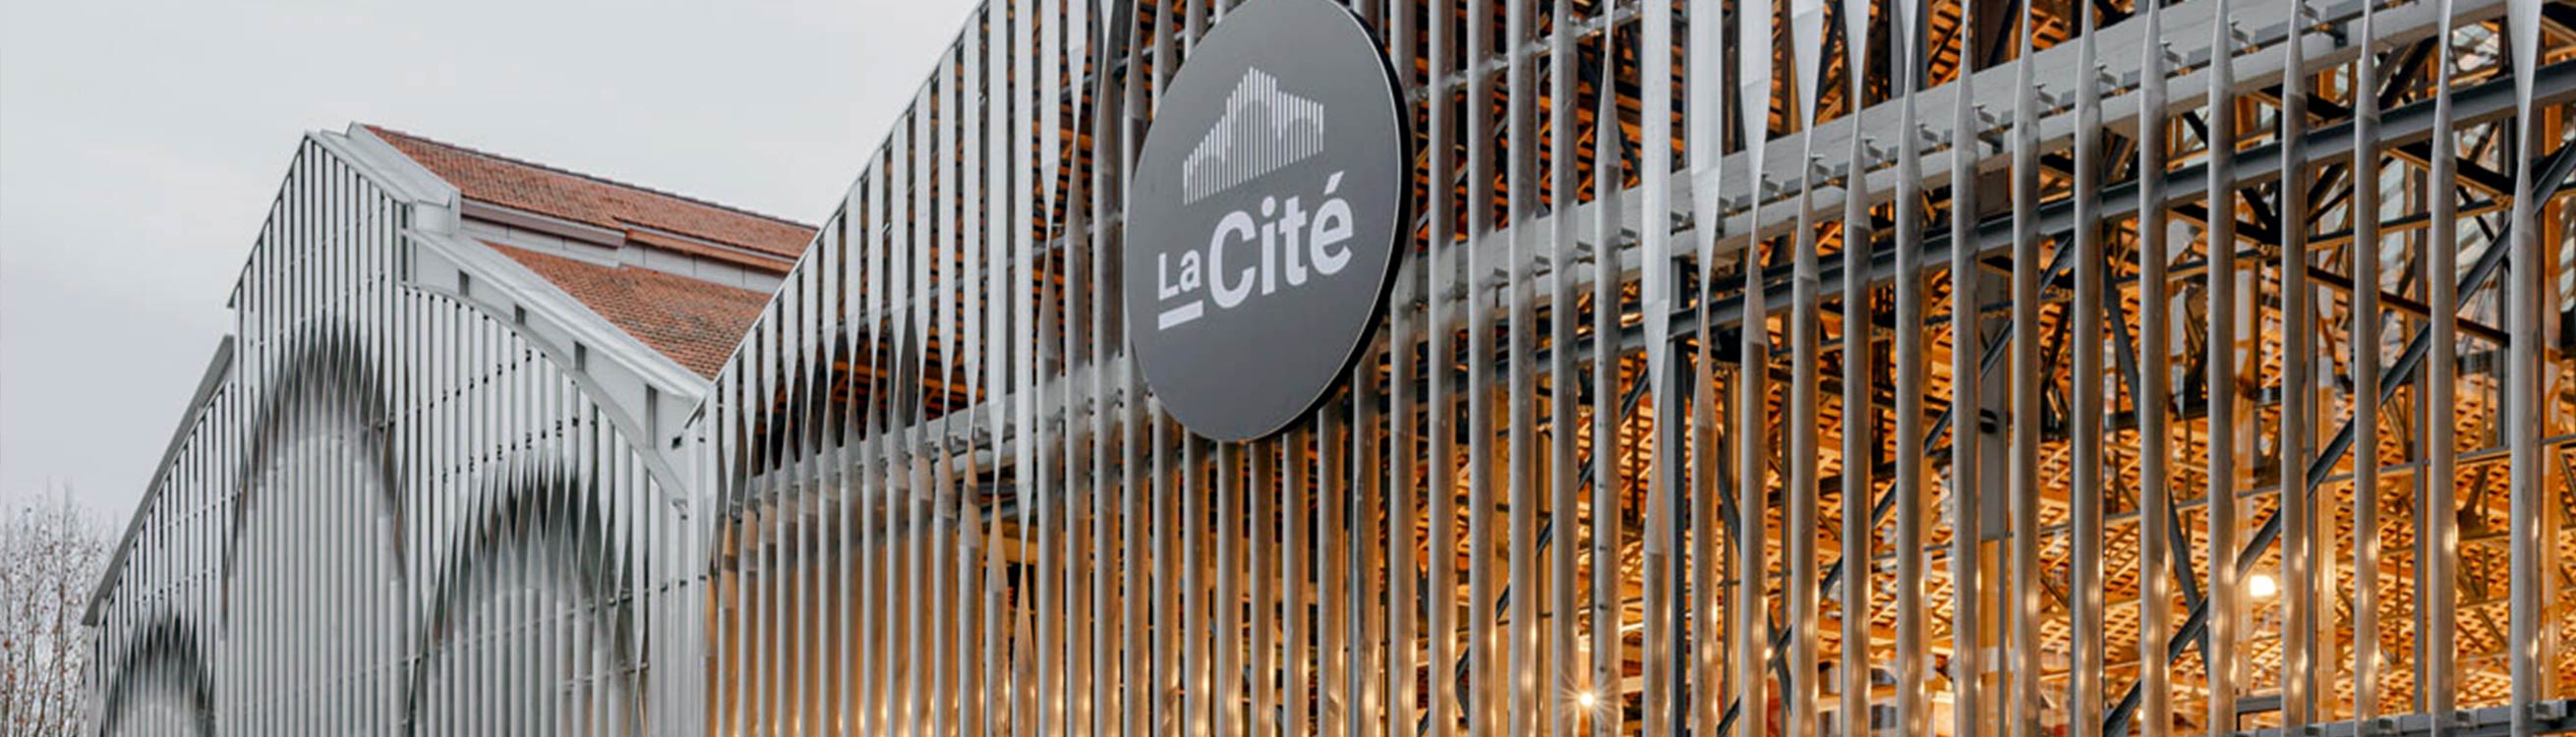 LA CITE - CO-WORKING SPACE IN FRANCE